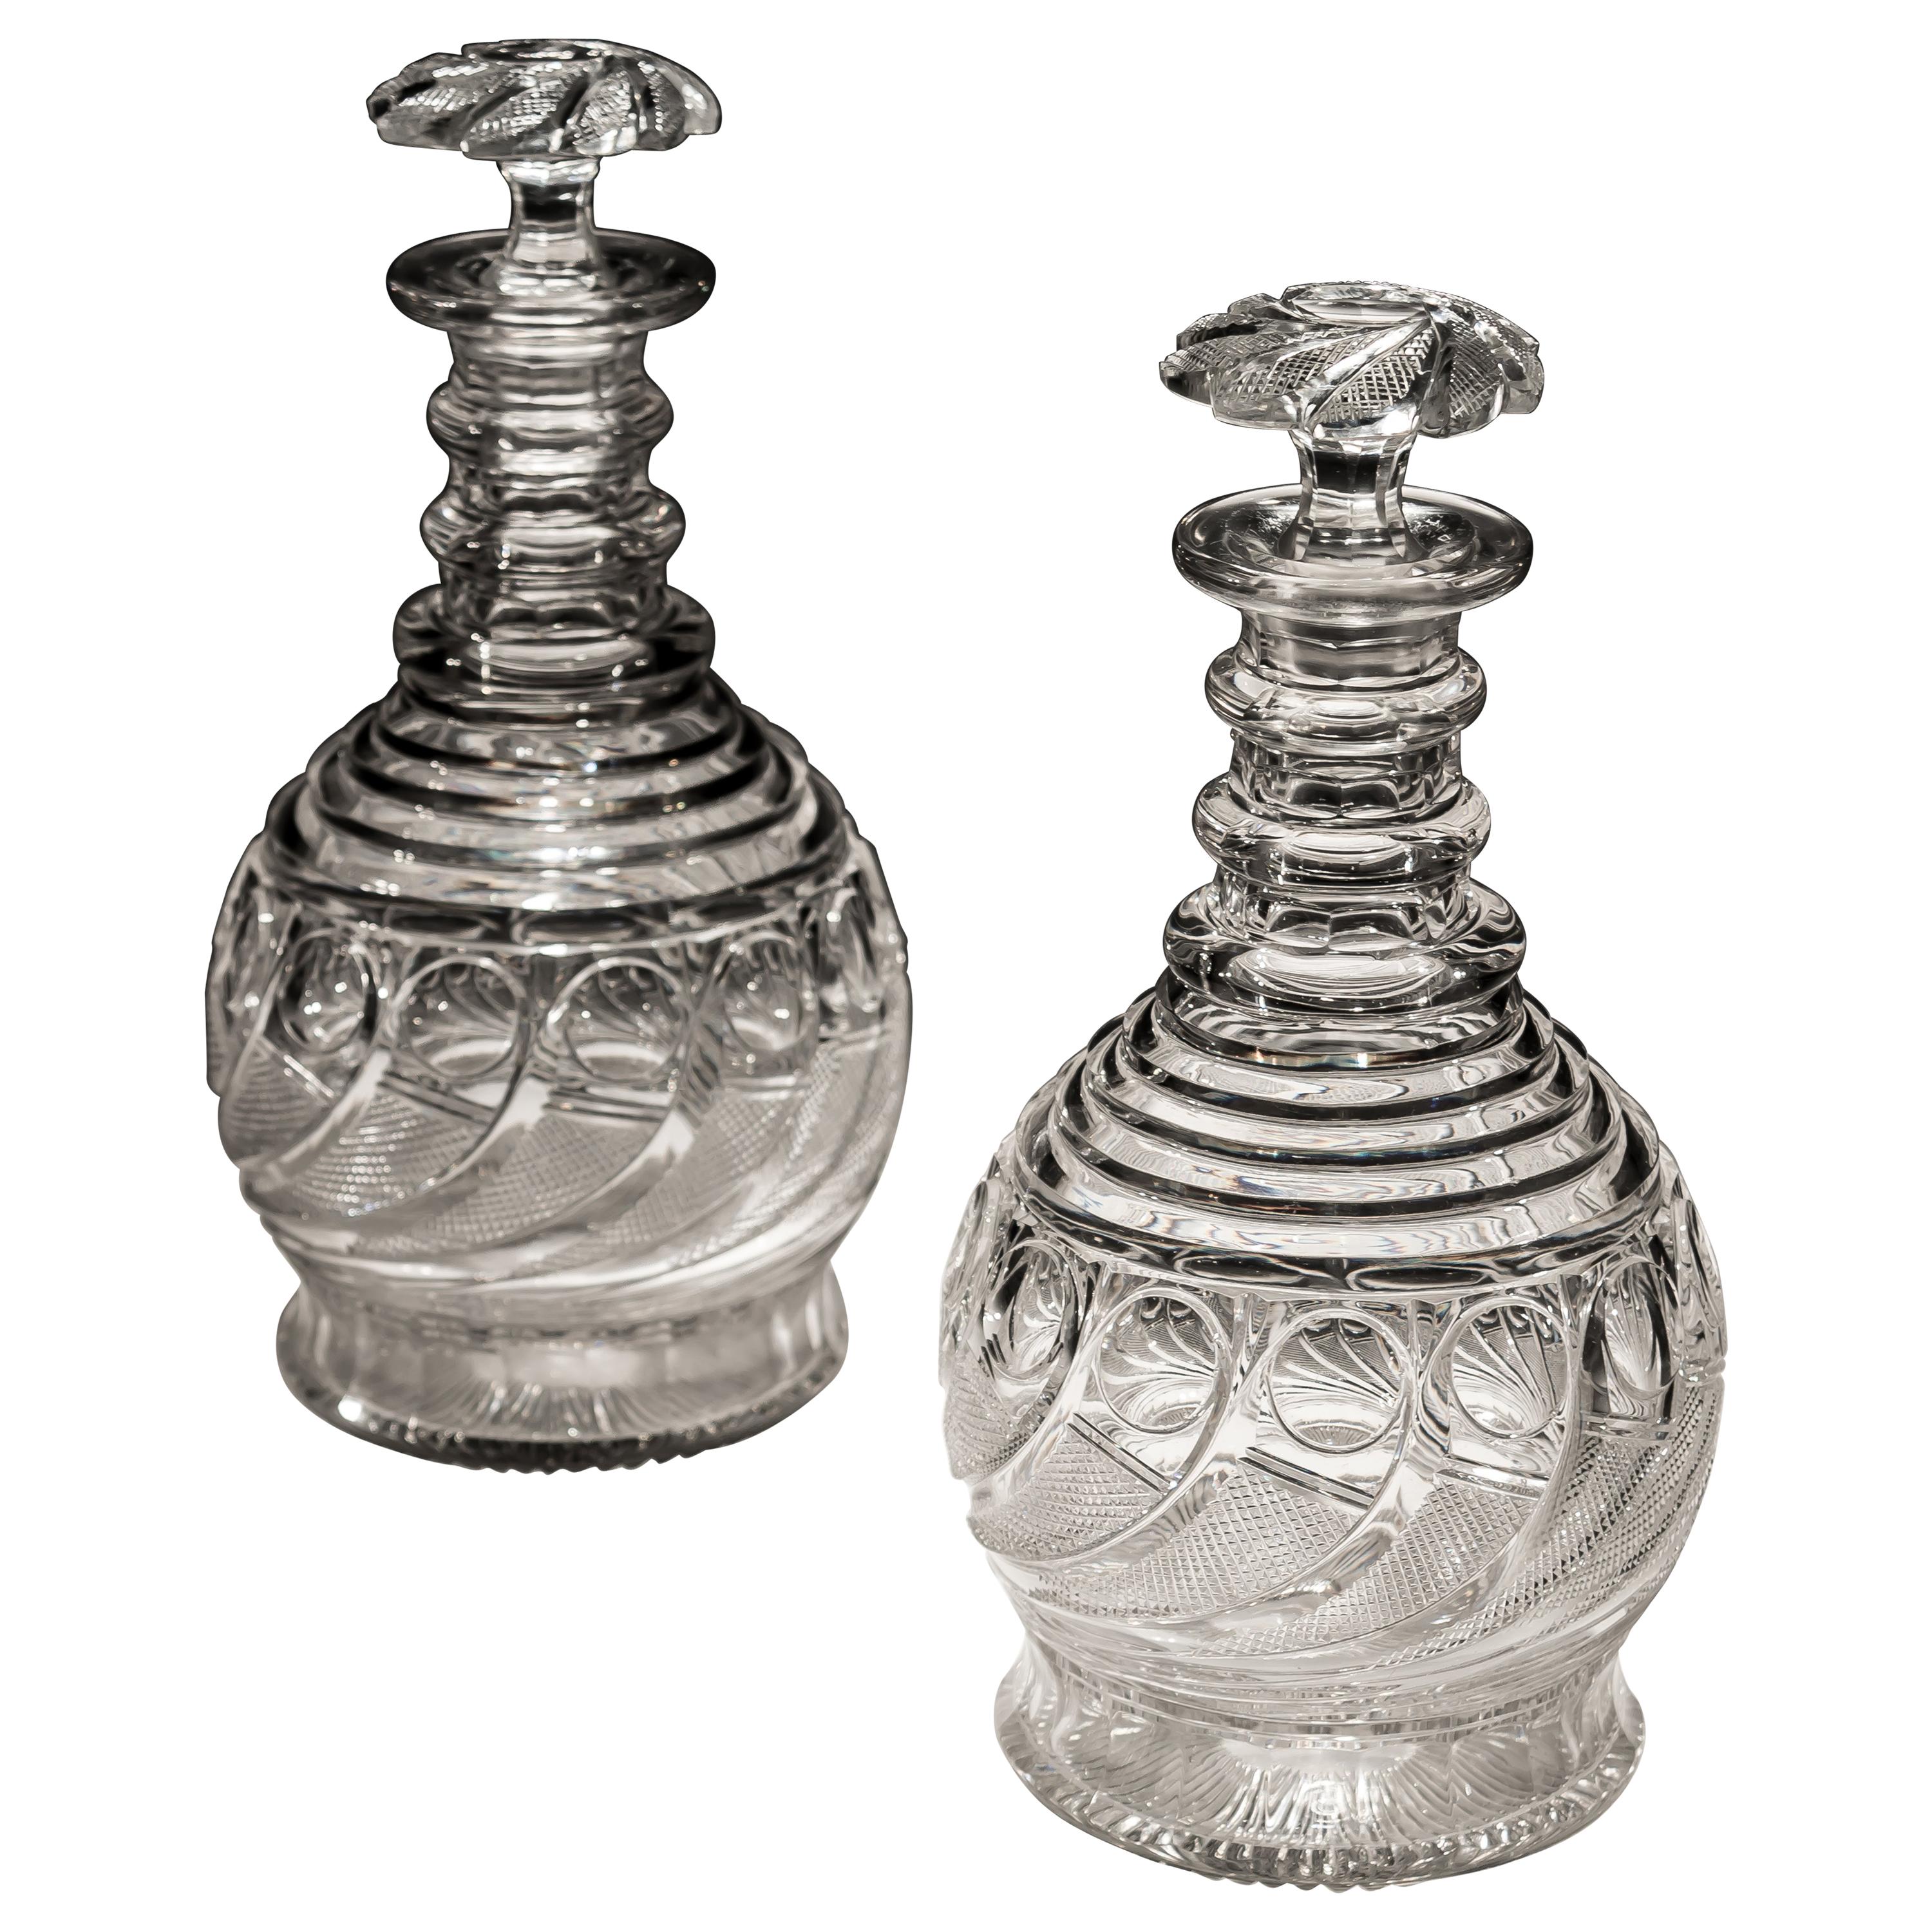 Exceptional Pair of Swirl Cut Regency Decanters with Swirl Cut Stoppers For Sale